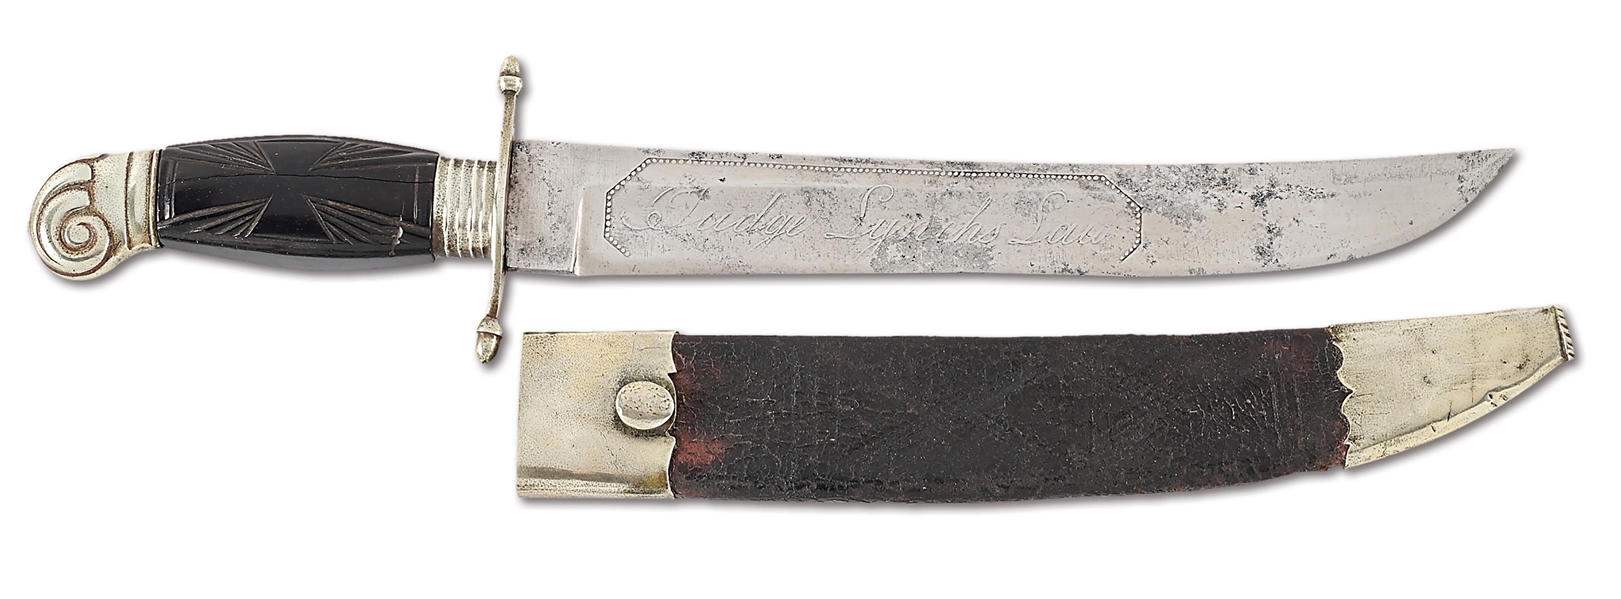 NEW ORLEANS "JUDGE LYNCHS LAW" BOWIE KNIFE.